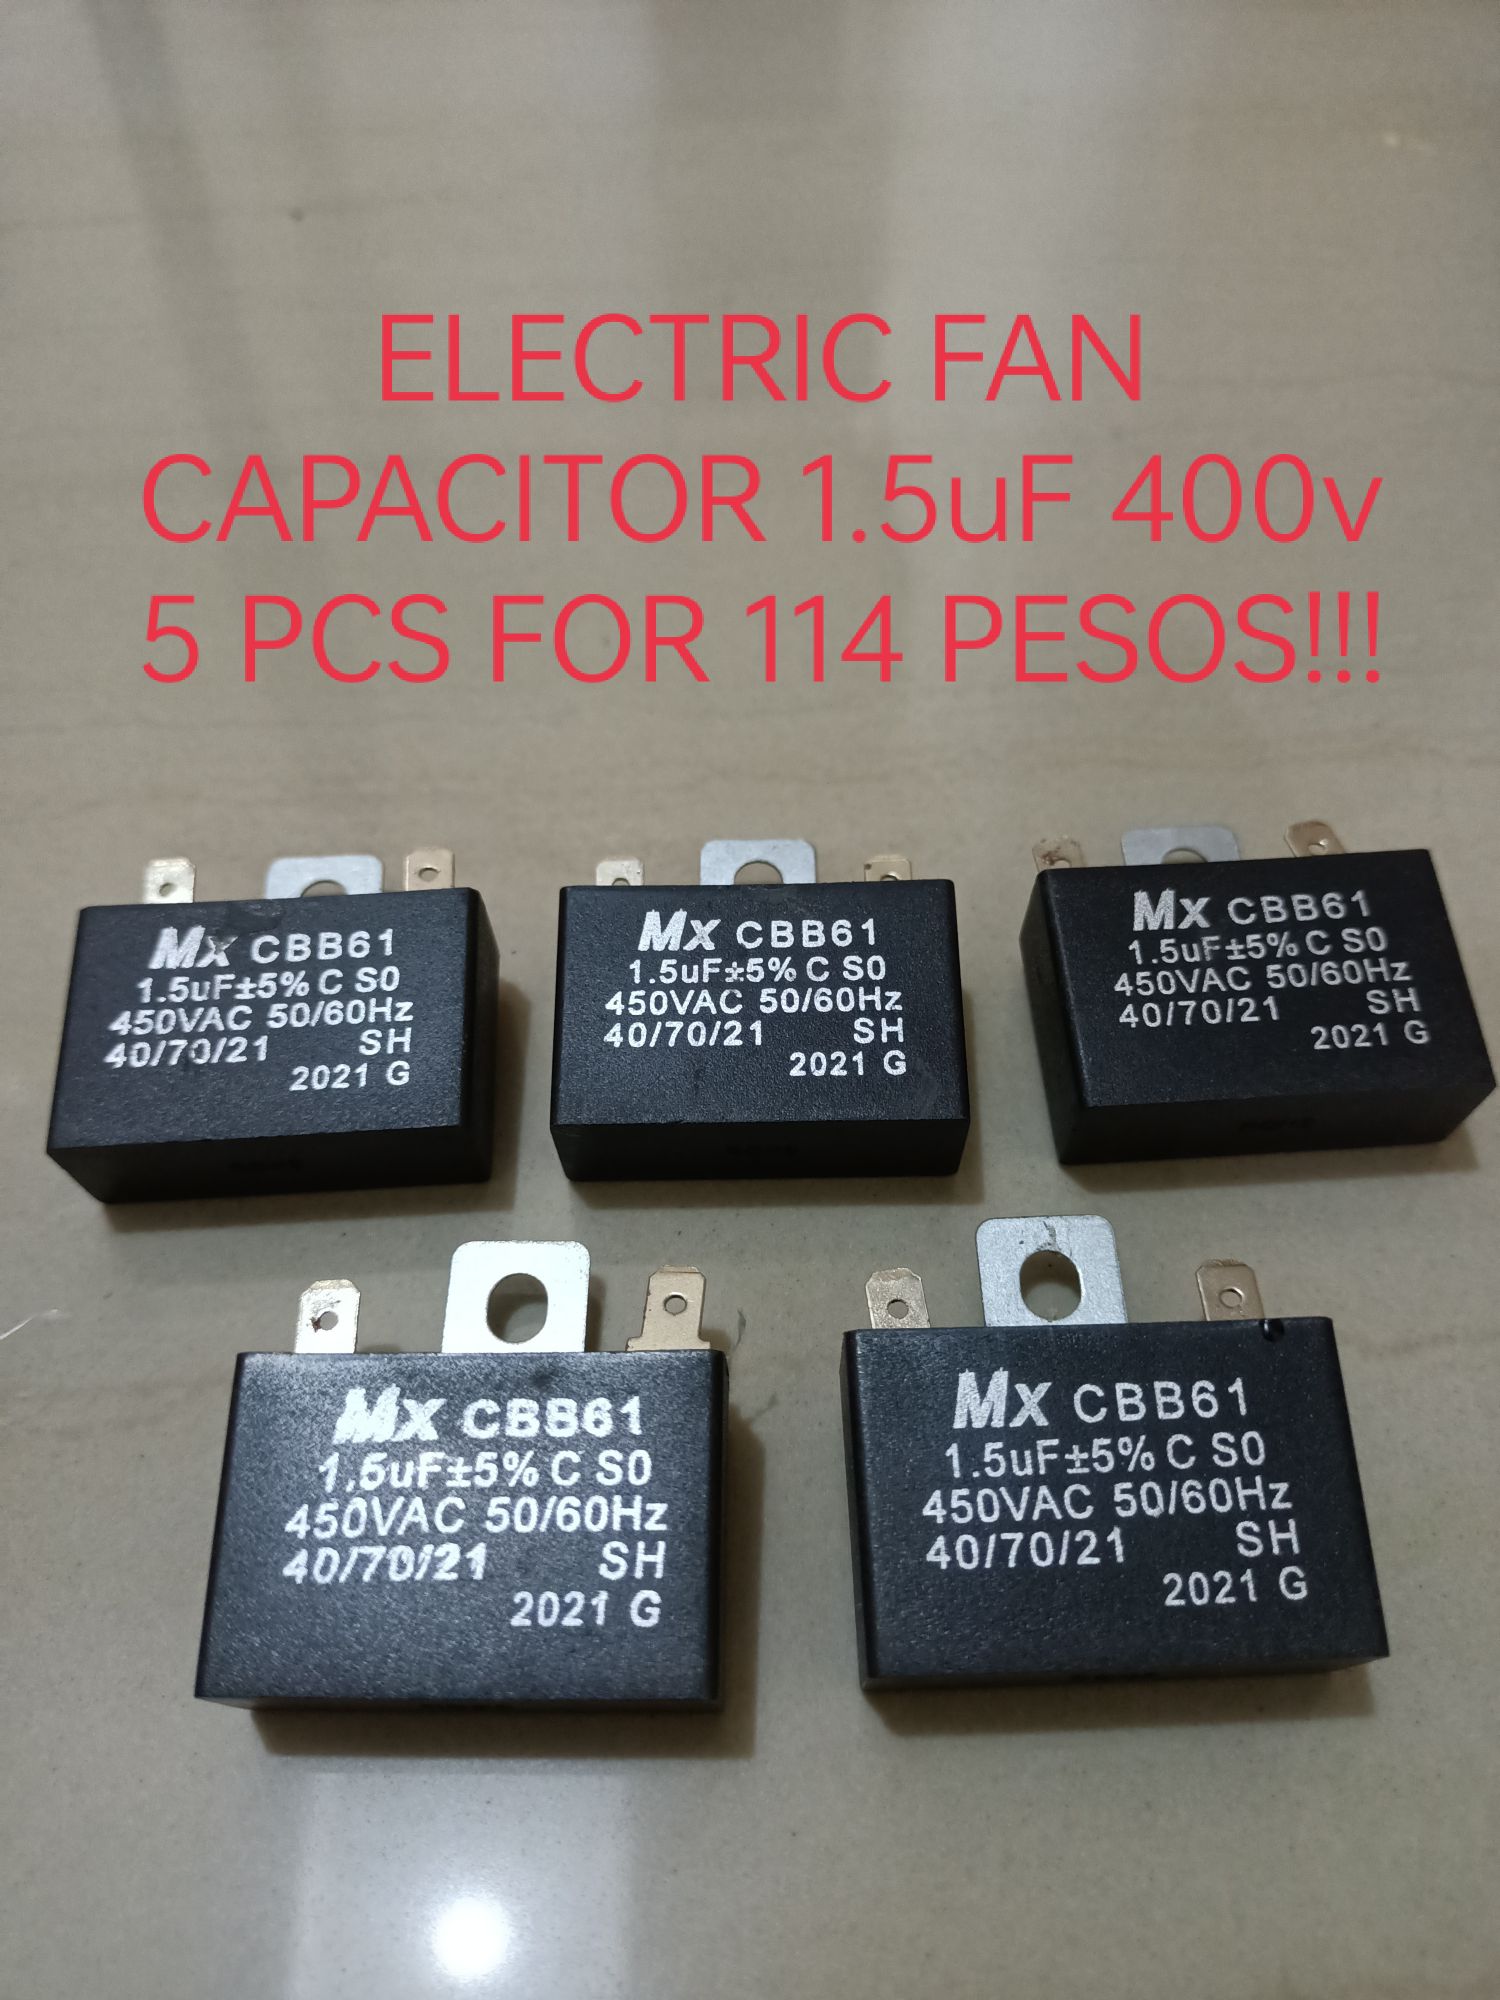 electric fan capacitor 1.5uf 400v (5PCS FOR 114PESOS) / electric fan ...